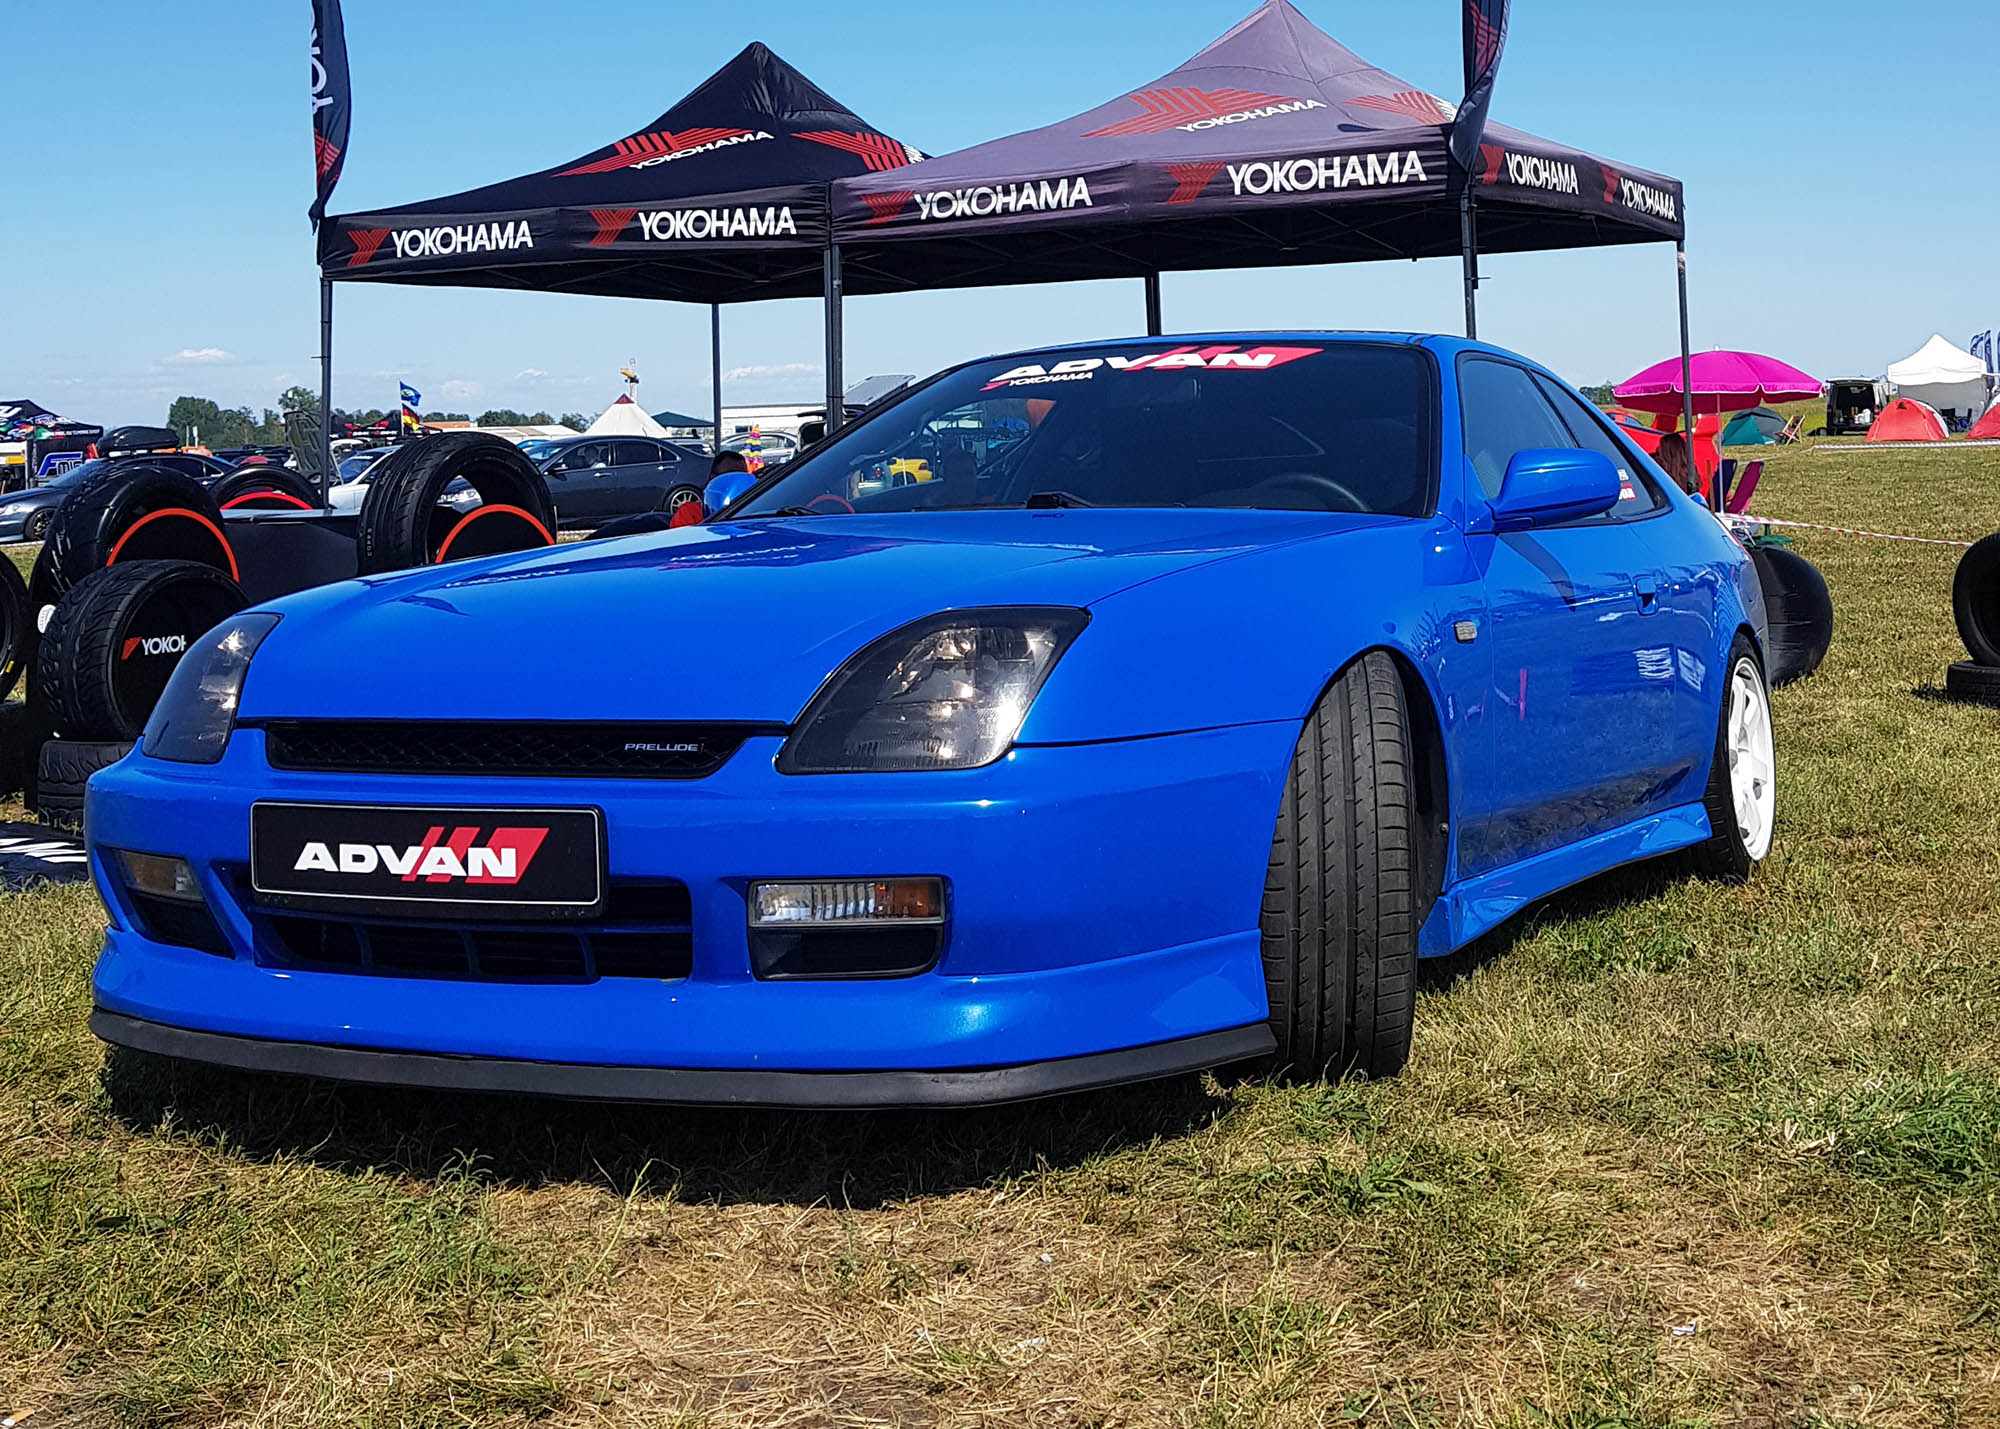 1997 Honda Prelude with a turbo K20 inline-four